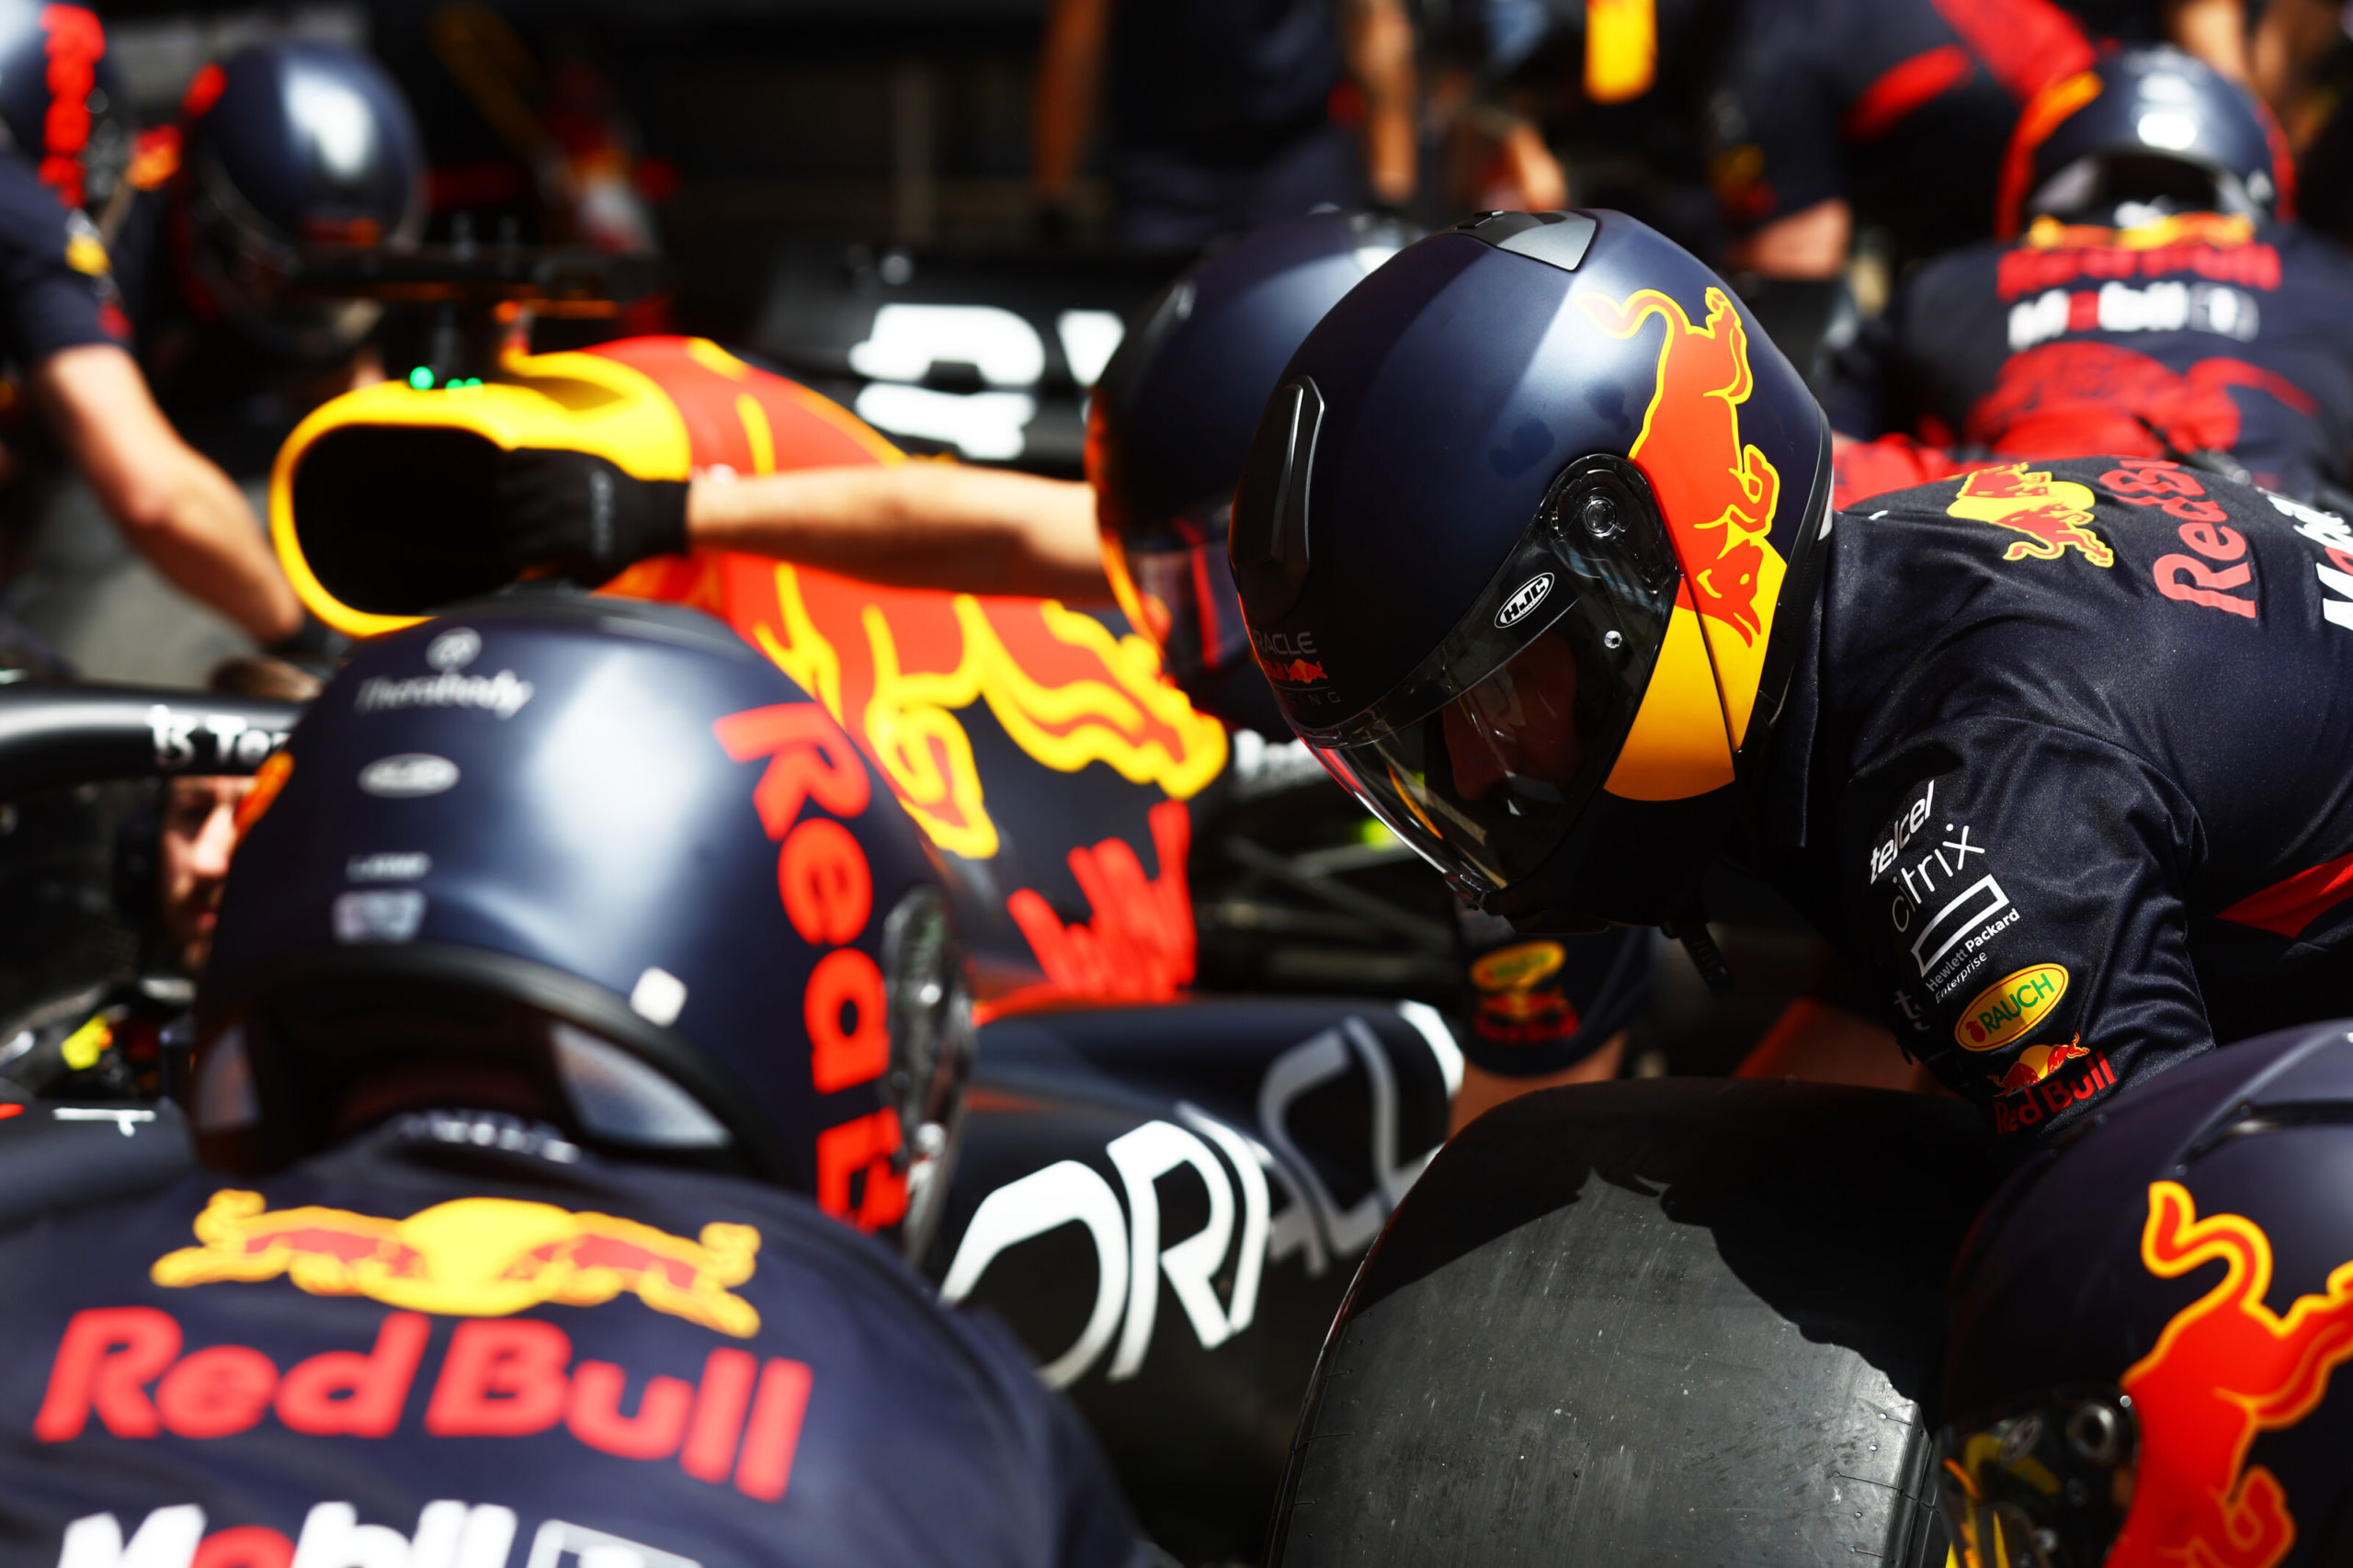 BARCELONA, SPAIN - MAY 20: The Red Bull Racing team practice pitstops prior to practice ahead of the F1 Grand Prix of Spain at Circuit de Barcelona-Catalunya on May 20, 2022 in Barcelona, Spain. (Photo by Mark Thompson/Getty Images) // Getty Images / Red Bull Content Pool // SI202205200305 // Usage for editorial use only //